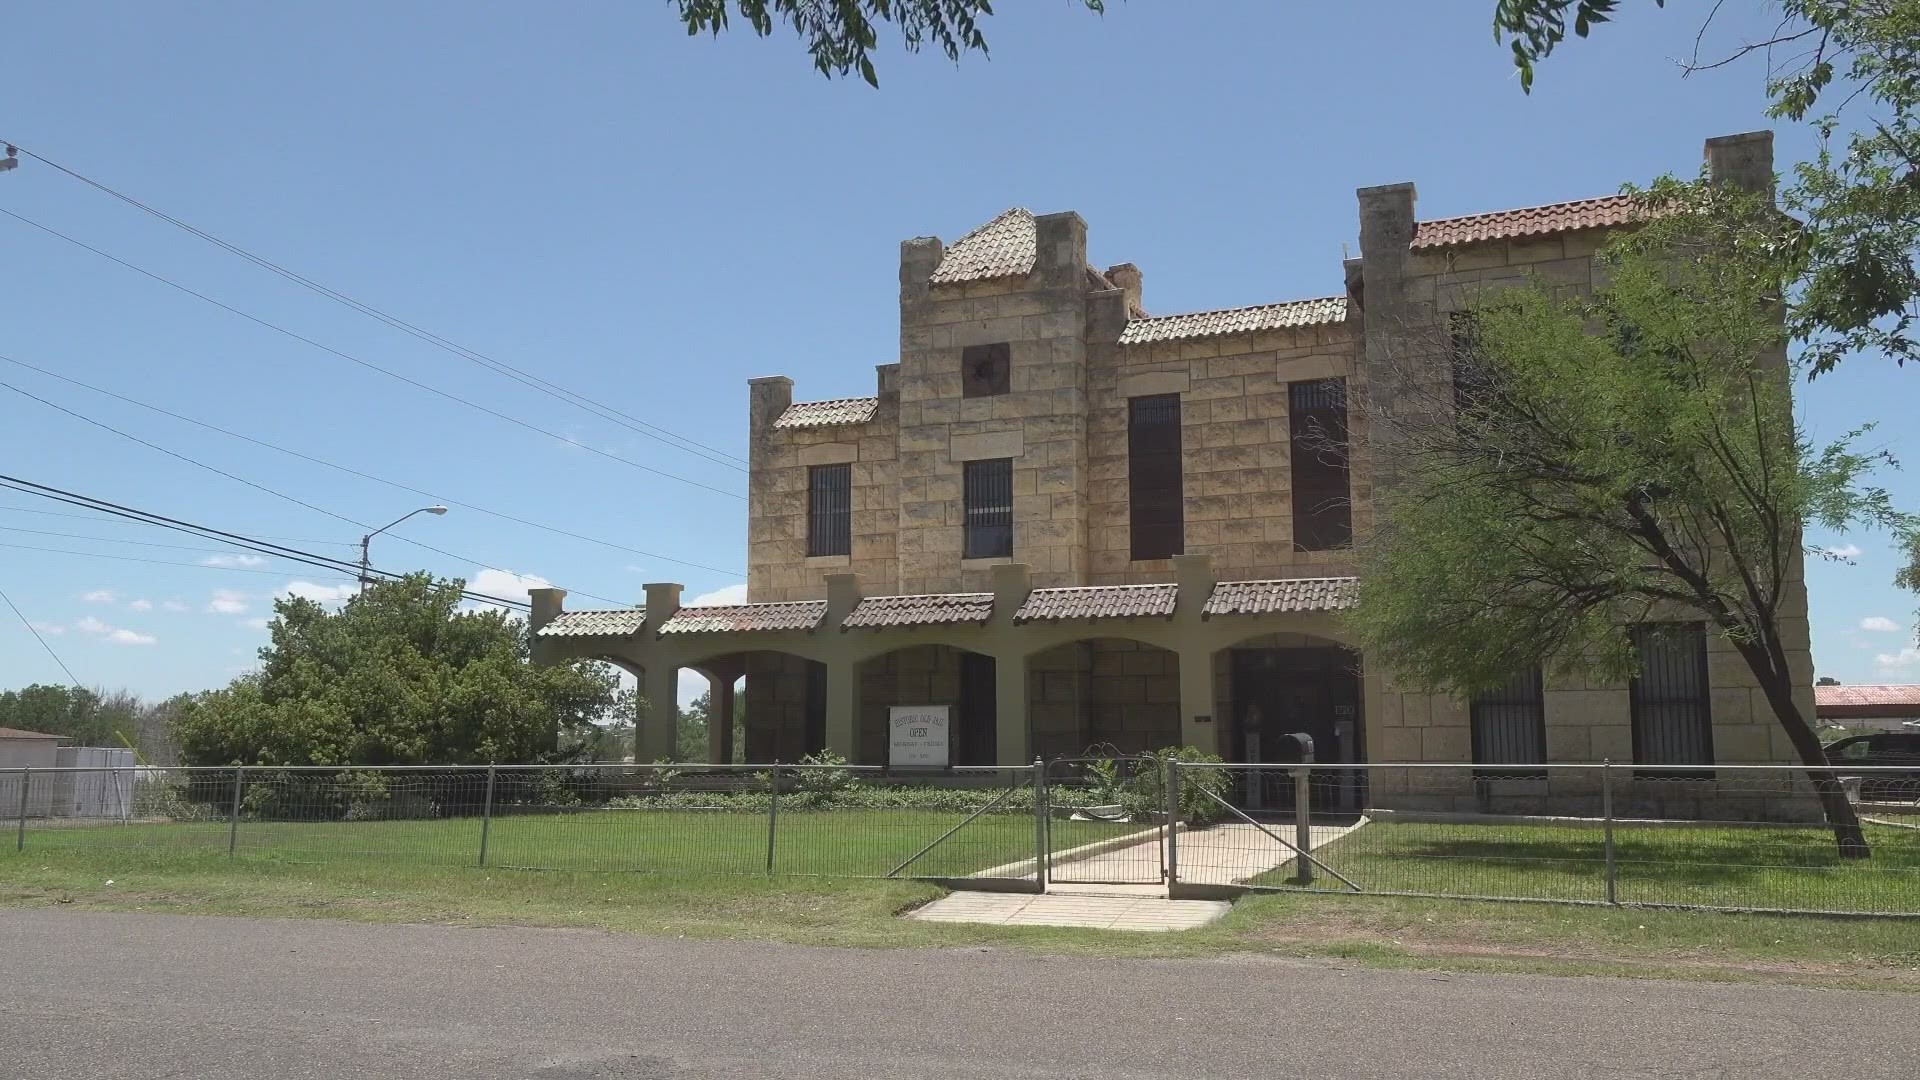 The old jail in Fort Stockton holds over a centuries worth of stories.